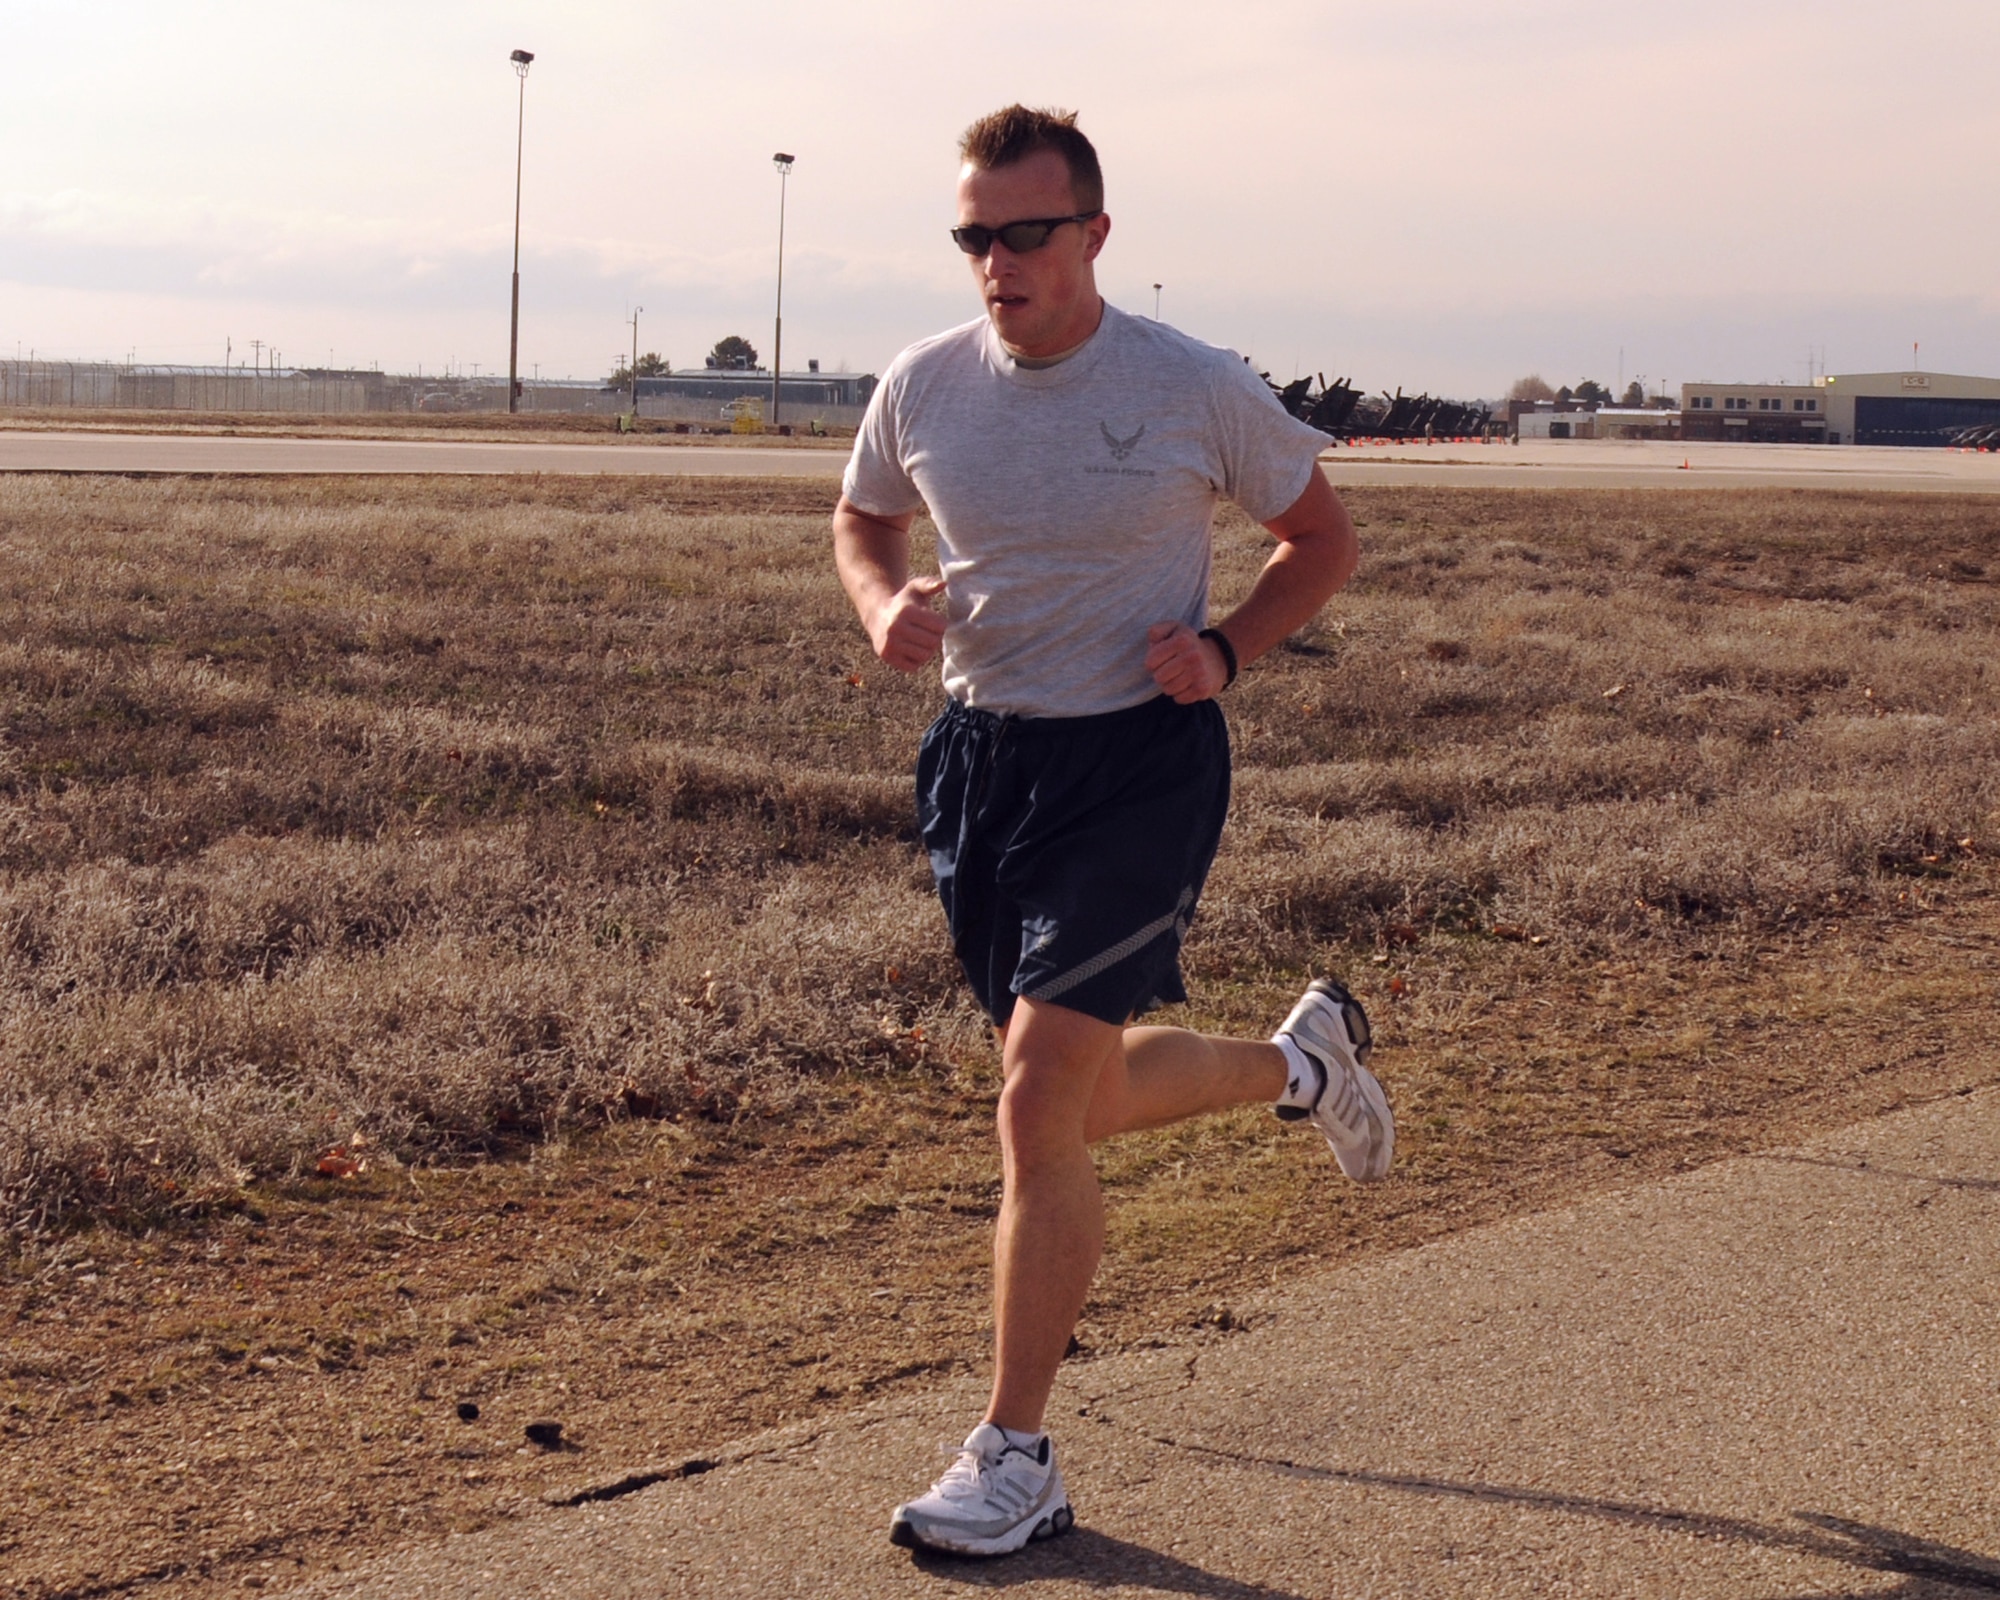 Staff Sgt. Josh Williams, a military pay technician for the 124th Fighter Wing finance section, completes the 1.5 mile run portion of his fitness test. (Air Force photo by Staff Sgt. Heather Walsh)(Released)